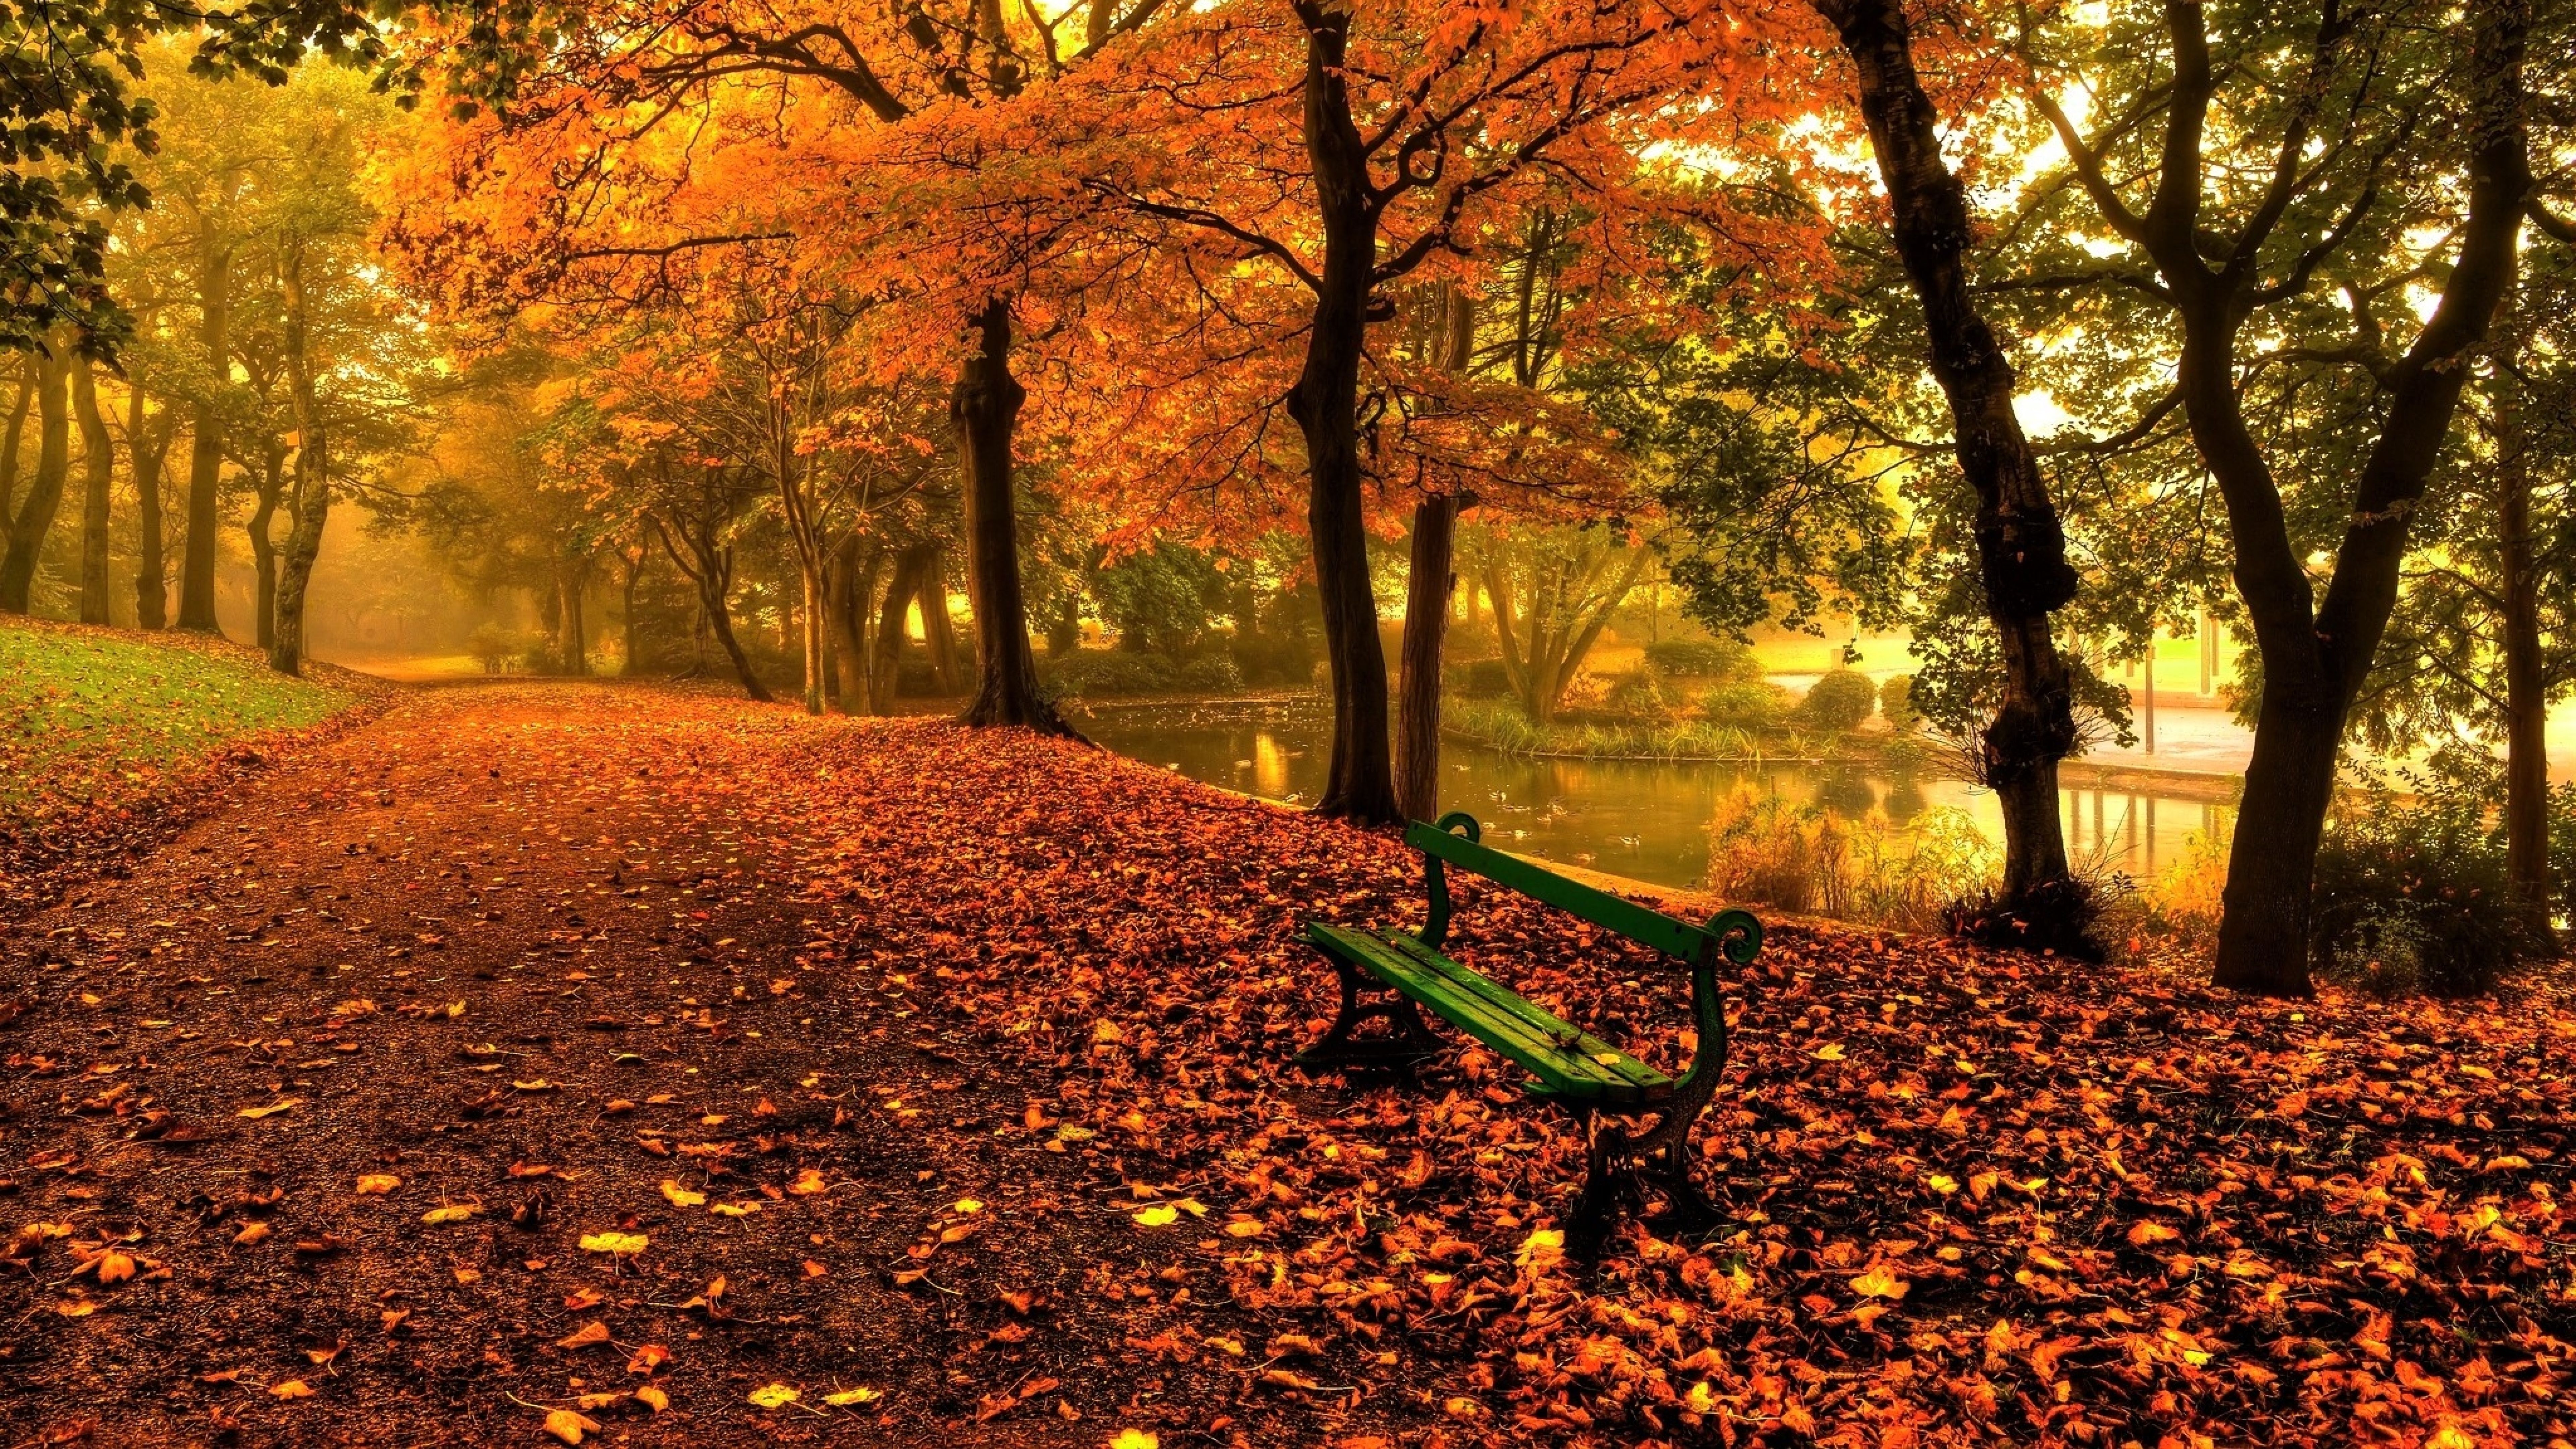 Bench And Trees From Autumn Park In Fall 8K Wallpaper, HD City 4K Wallpaper, Image, Photo and Background